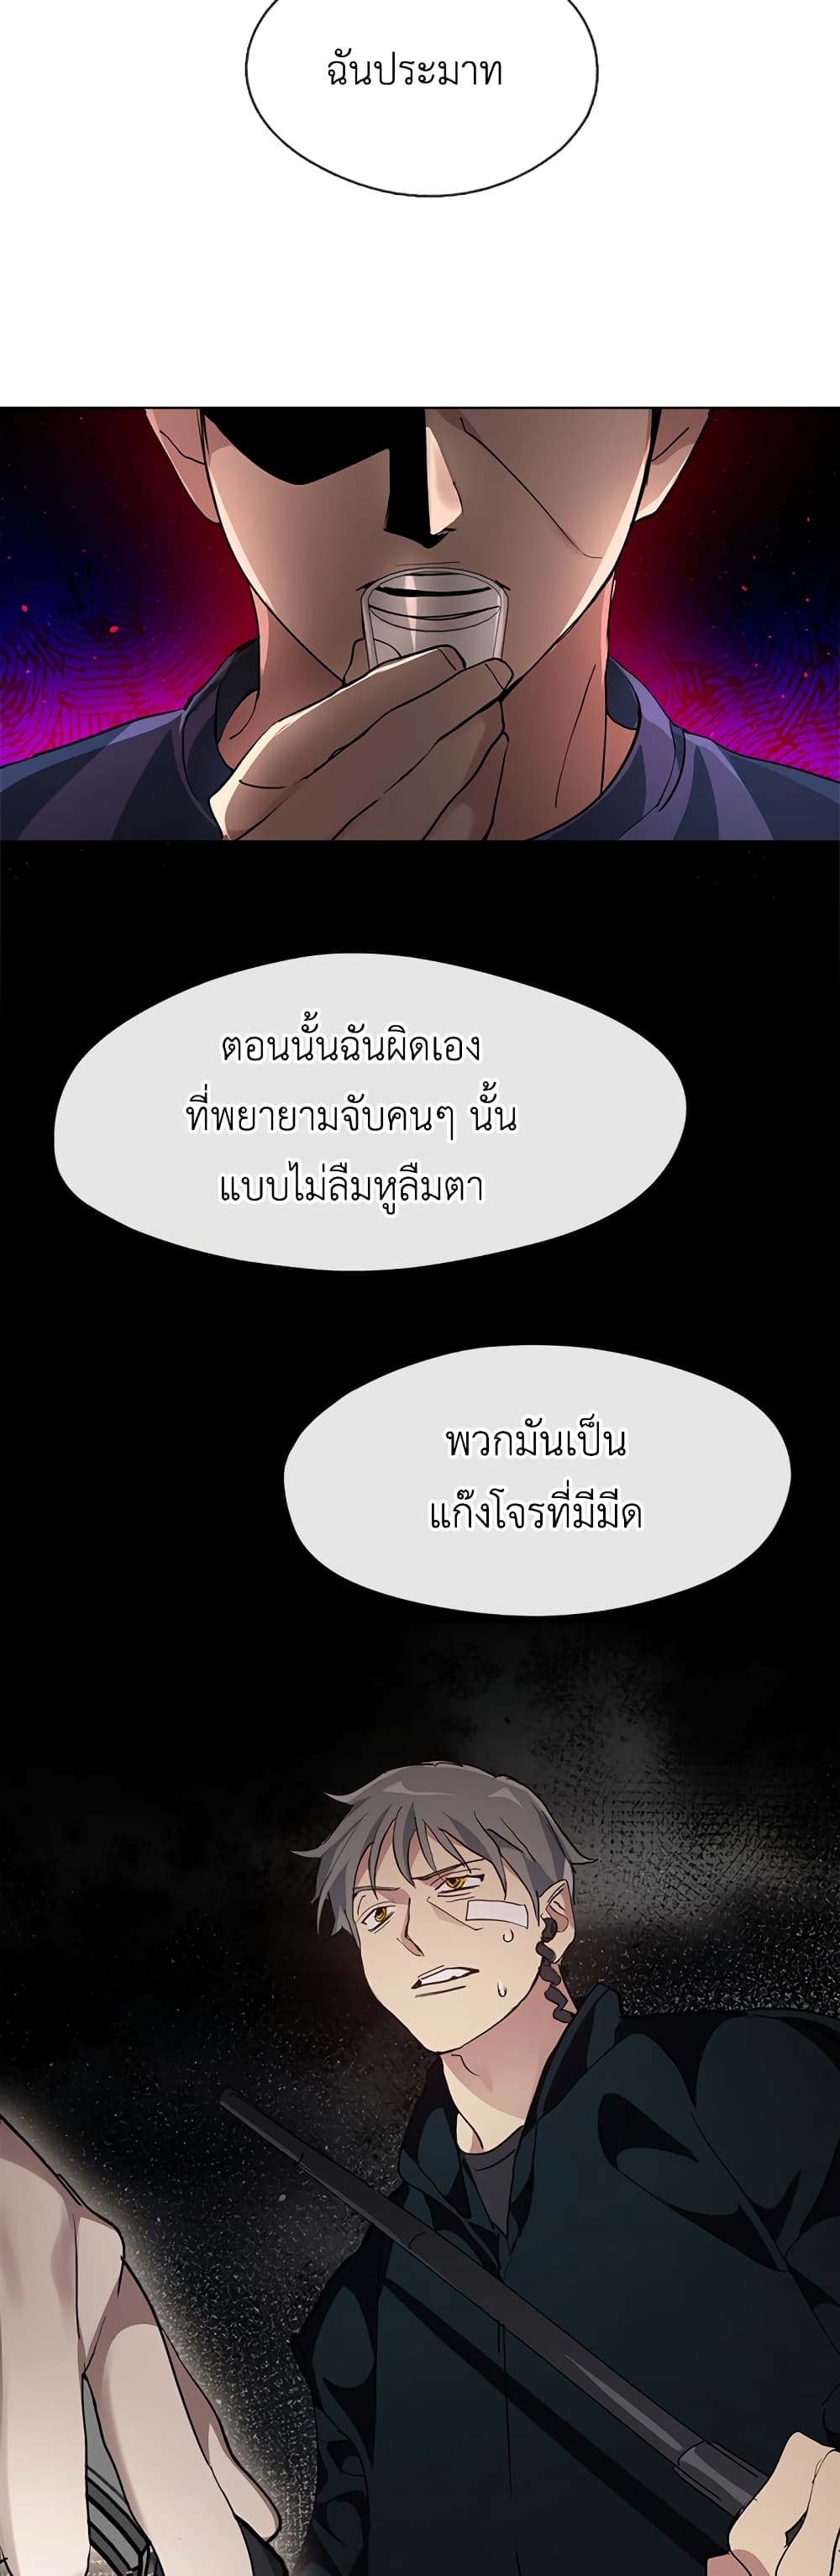 Restaurant in the After Life ตอนที่ 7 (6)